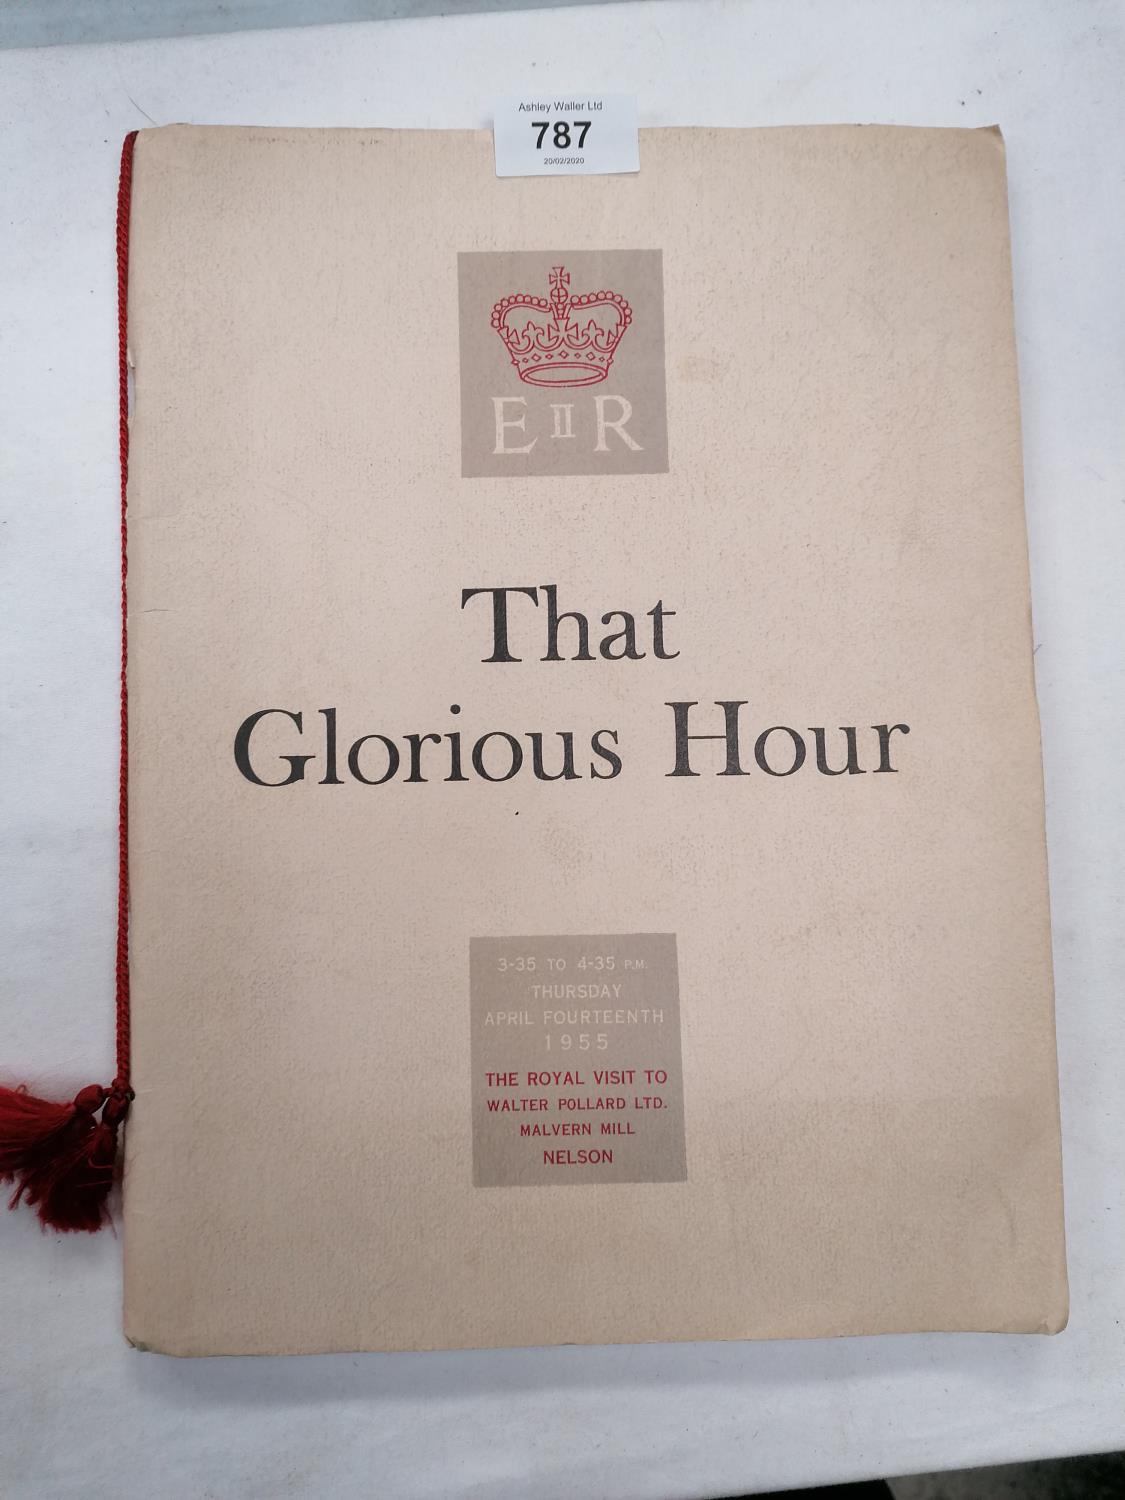 A 1955 VINTAGE 'THAT GLORIOUS HOUR' ROYAL VISIT TO MALVERN HILL BOOK